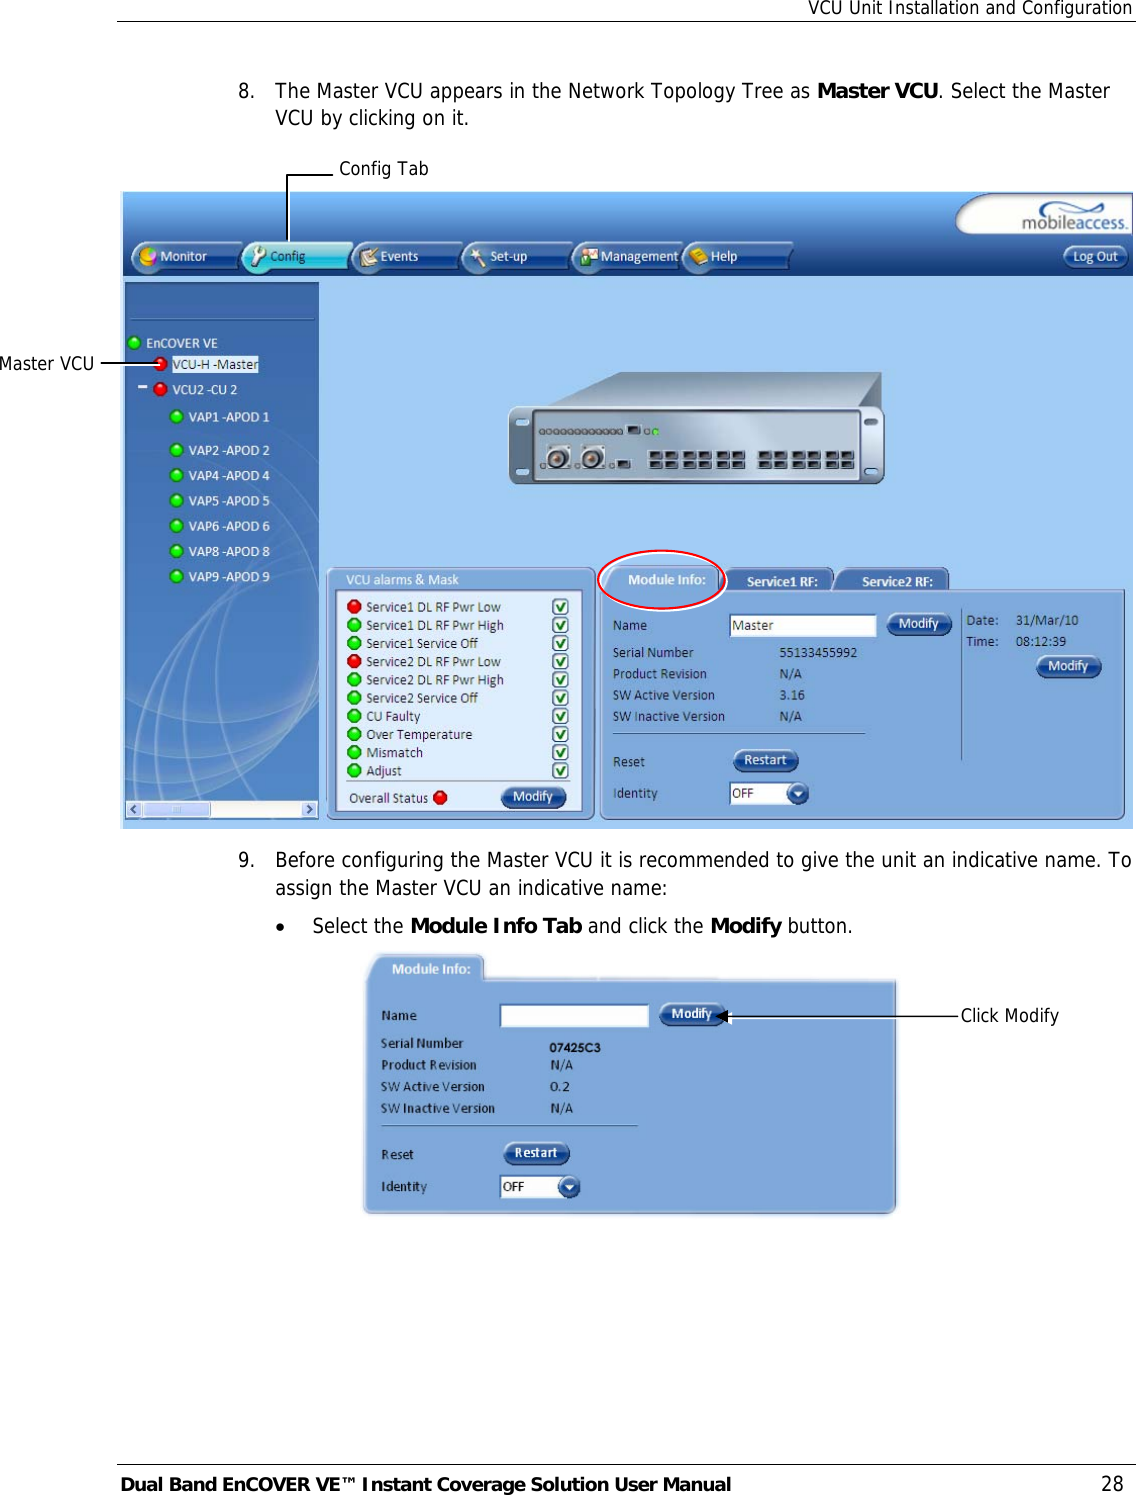 VCU Unit Installation and Configuration Dual Band EnCOVER VE™ Instant Coverage Solution User Manual  28 8.  The Master VCU appears in the Network Topology Tree as Master VCU. Select the Master VCU by clicking on it.   9.  Before configuring the Master VCU it is recommended to give the unit an indicative name. To assign the Master VCU an indicative name: • Select the Module Info Tab and click the Modify button.   Click Modify Config Tab Master VCU